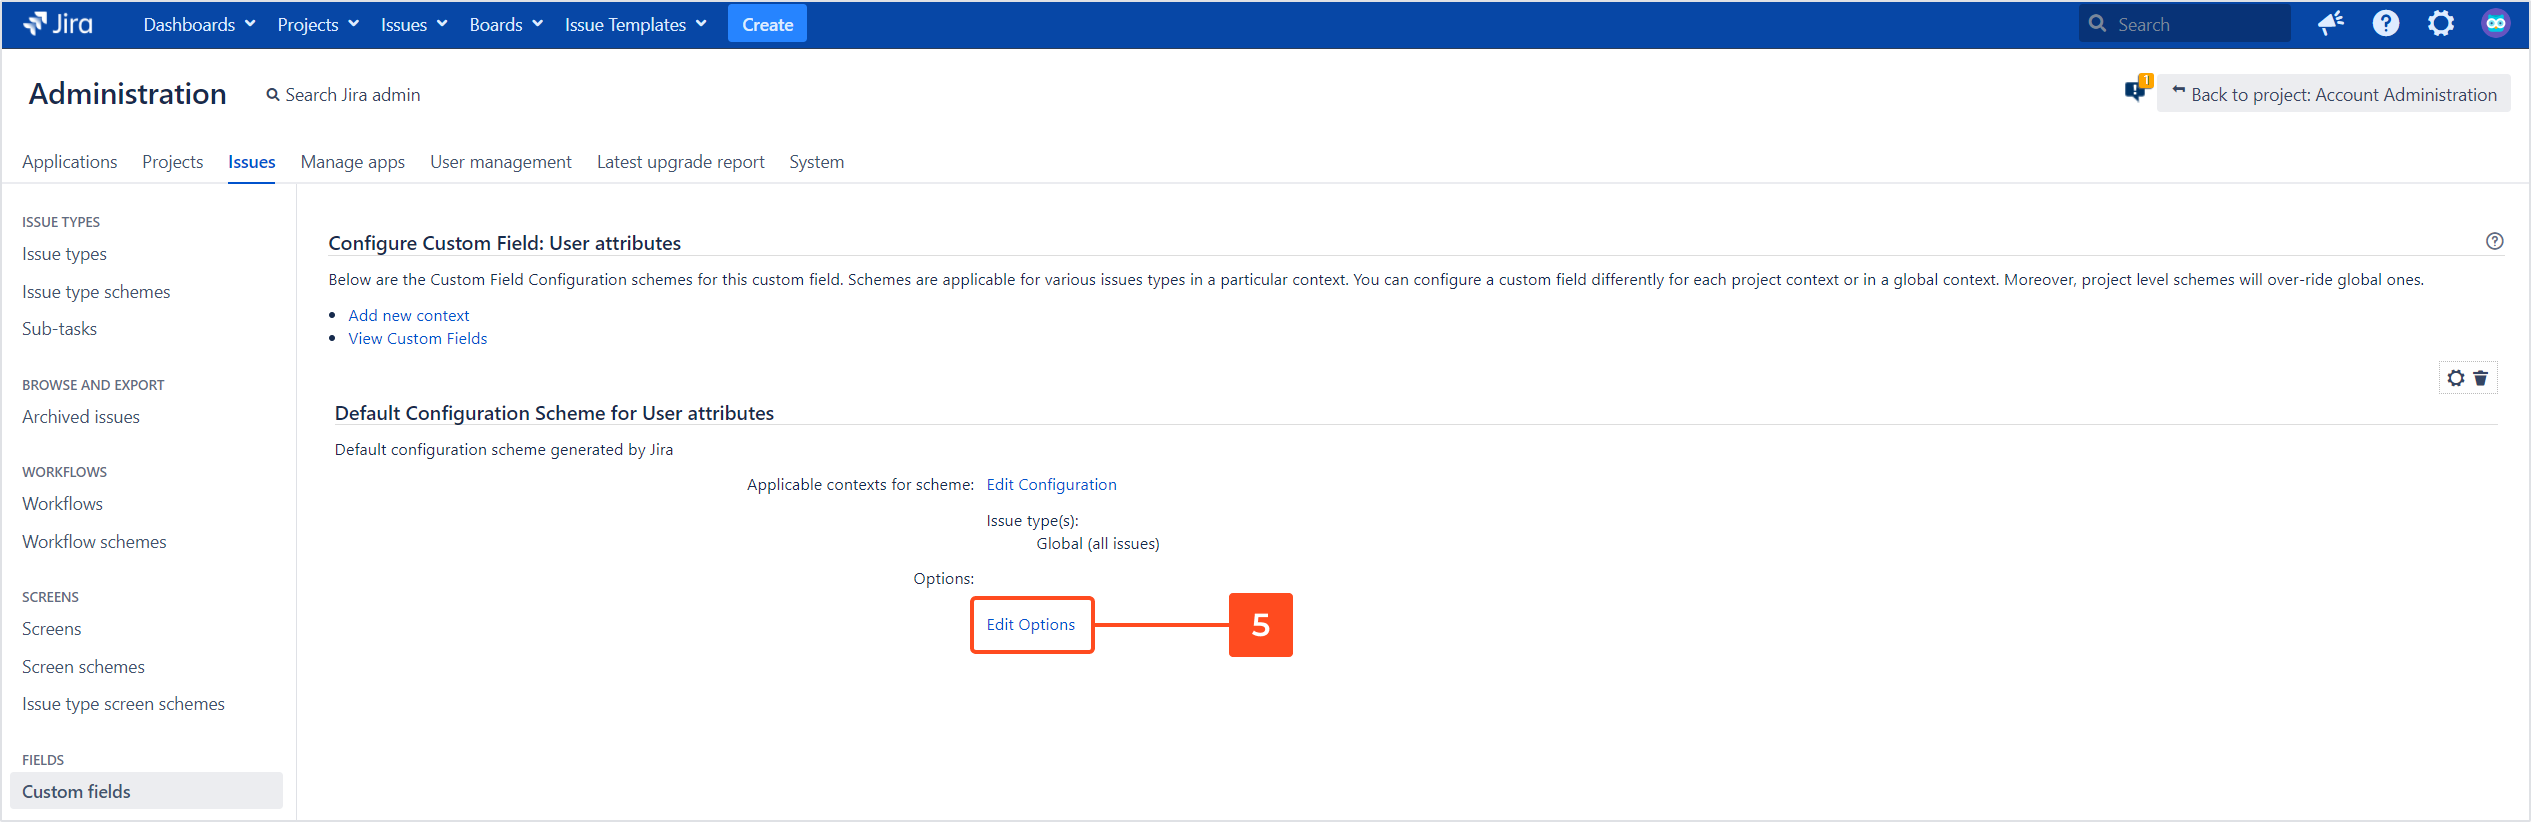 Active Directory Attributes Sync for Jira - Display AD attributes in Jira issues: Configure the AD custom field